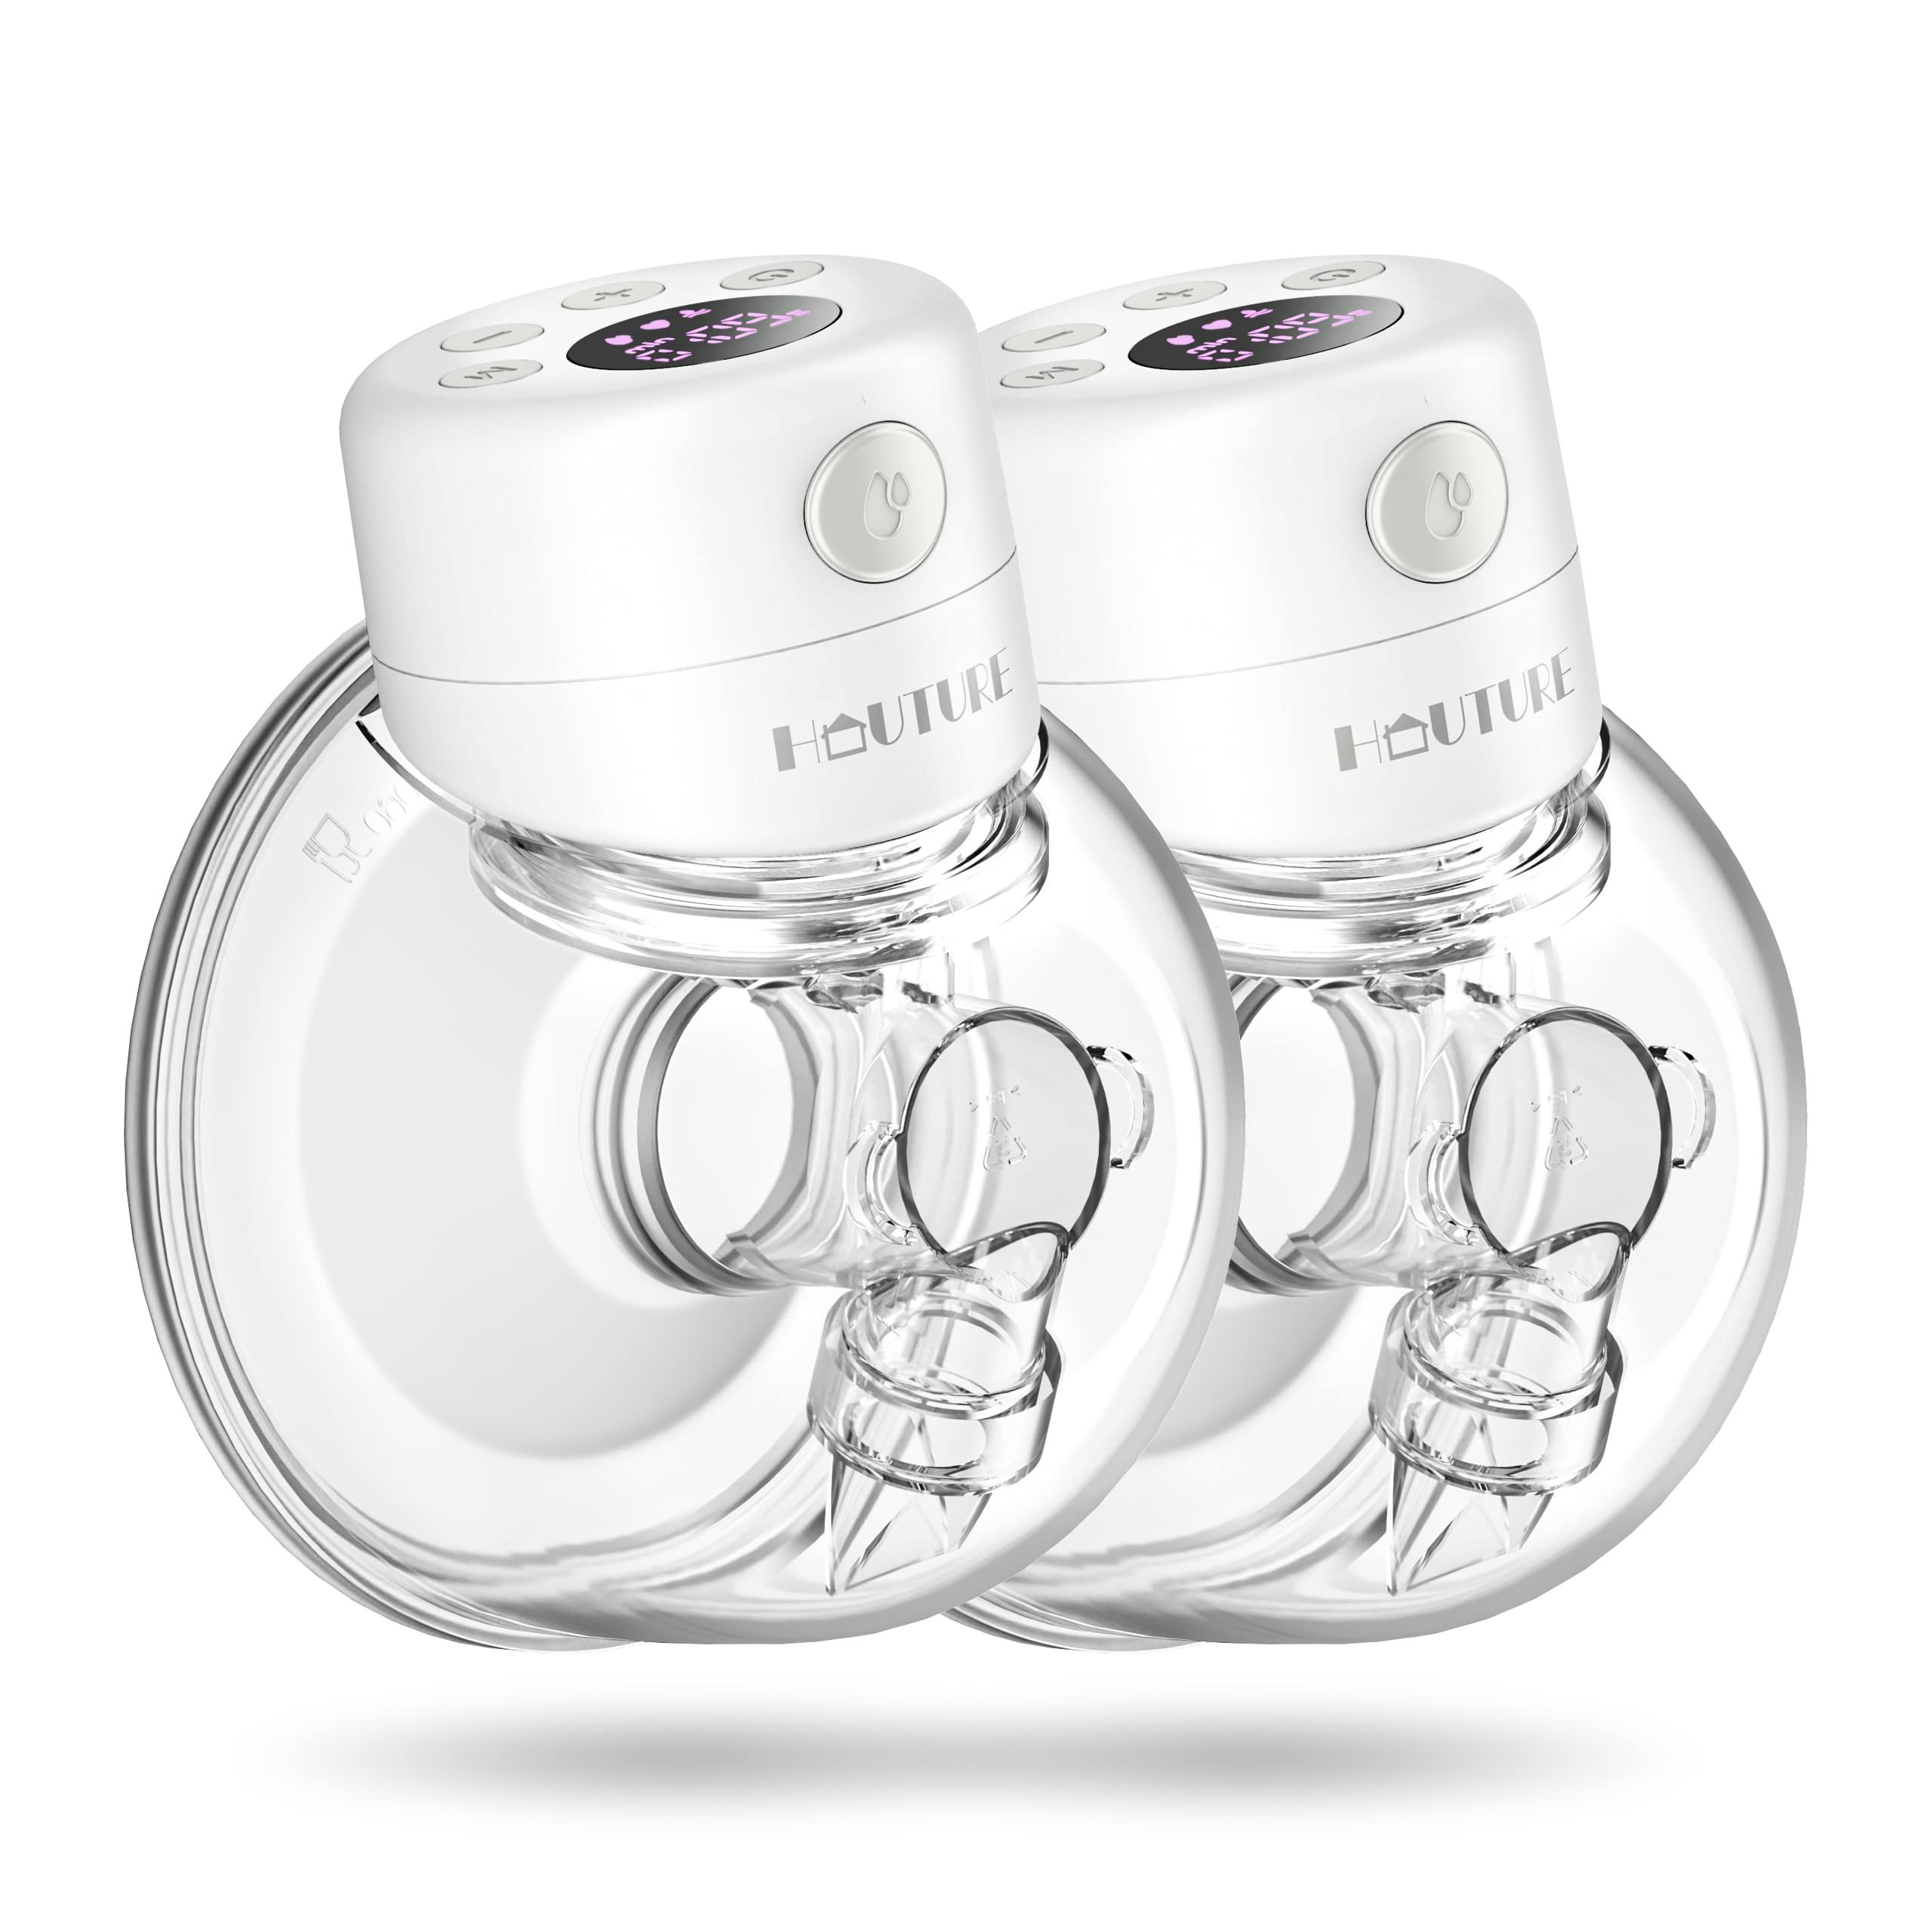 Wearable Breast Pump, 2 Pcs HAUTURE Electric Breast Pump, Hands Free & Low Noise Portable Breast Pum | Amazon (US)